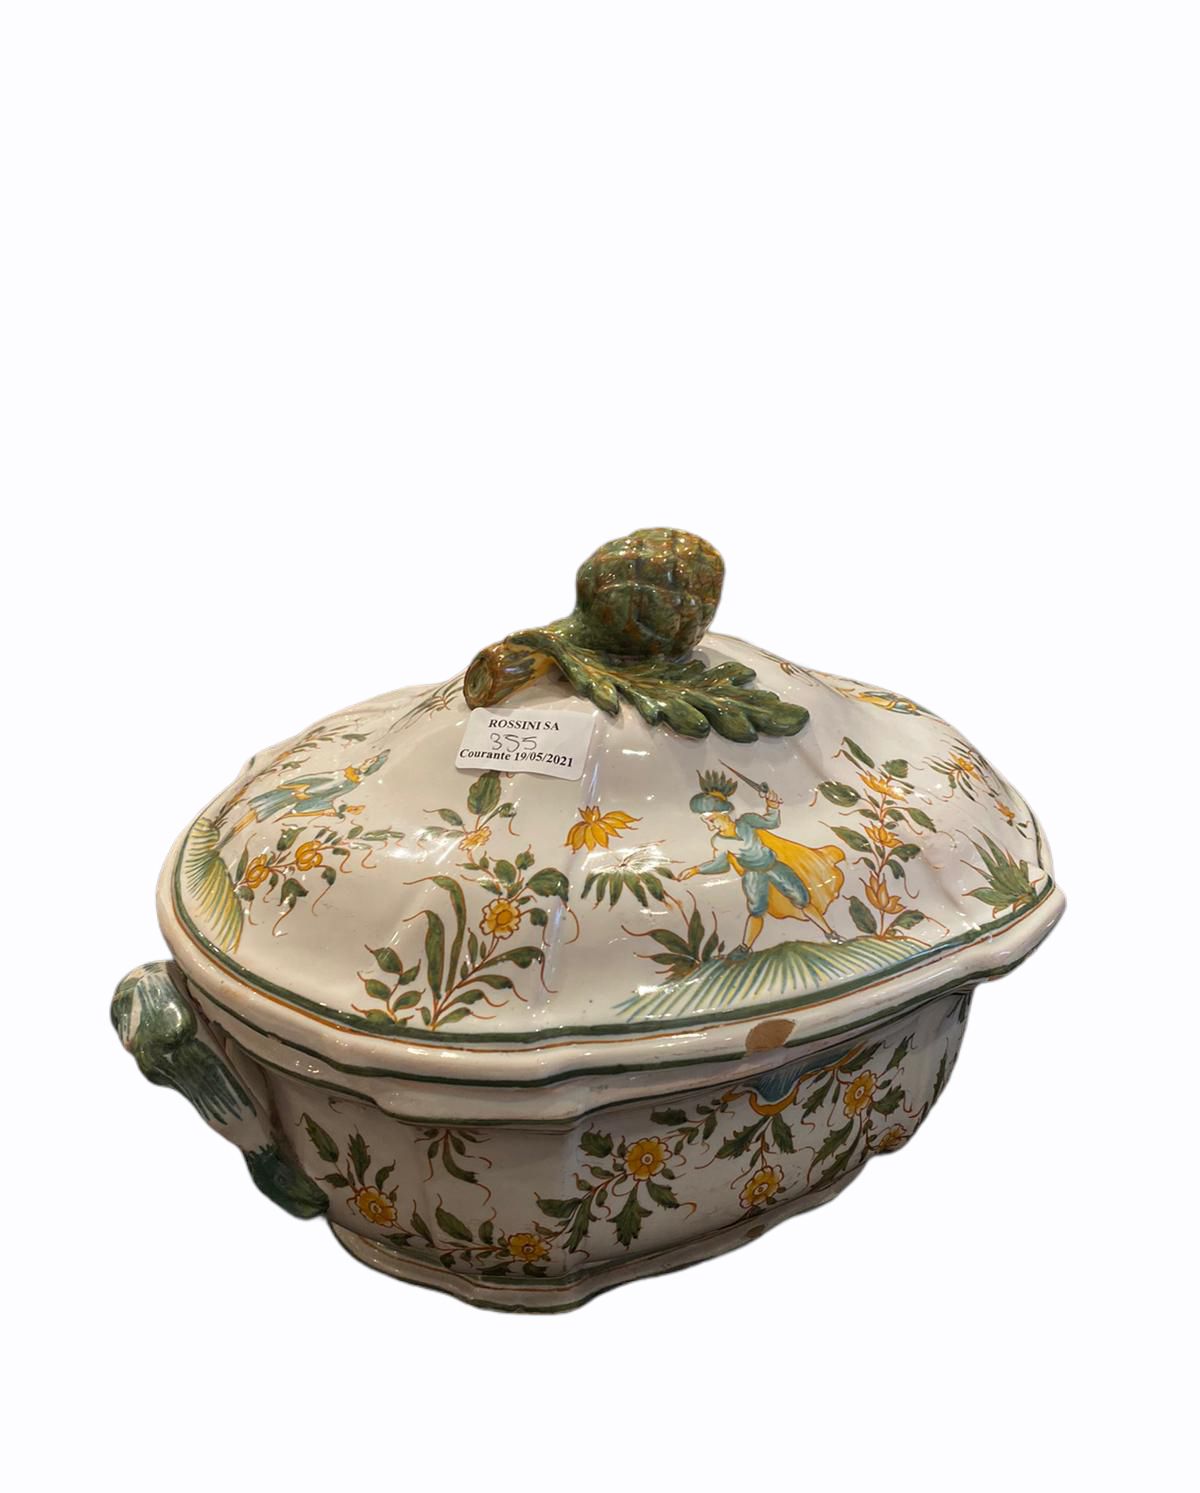 Null MOUSTIERS - XIXth century

Covered oval earthenware tureen with a curved ed&hellip;